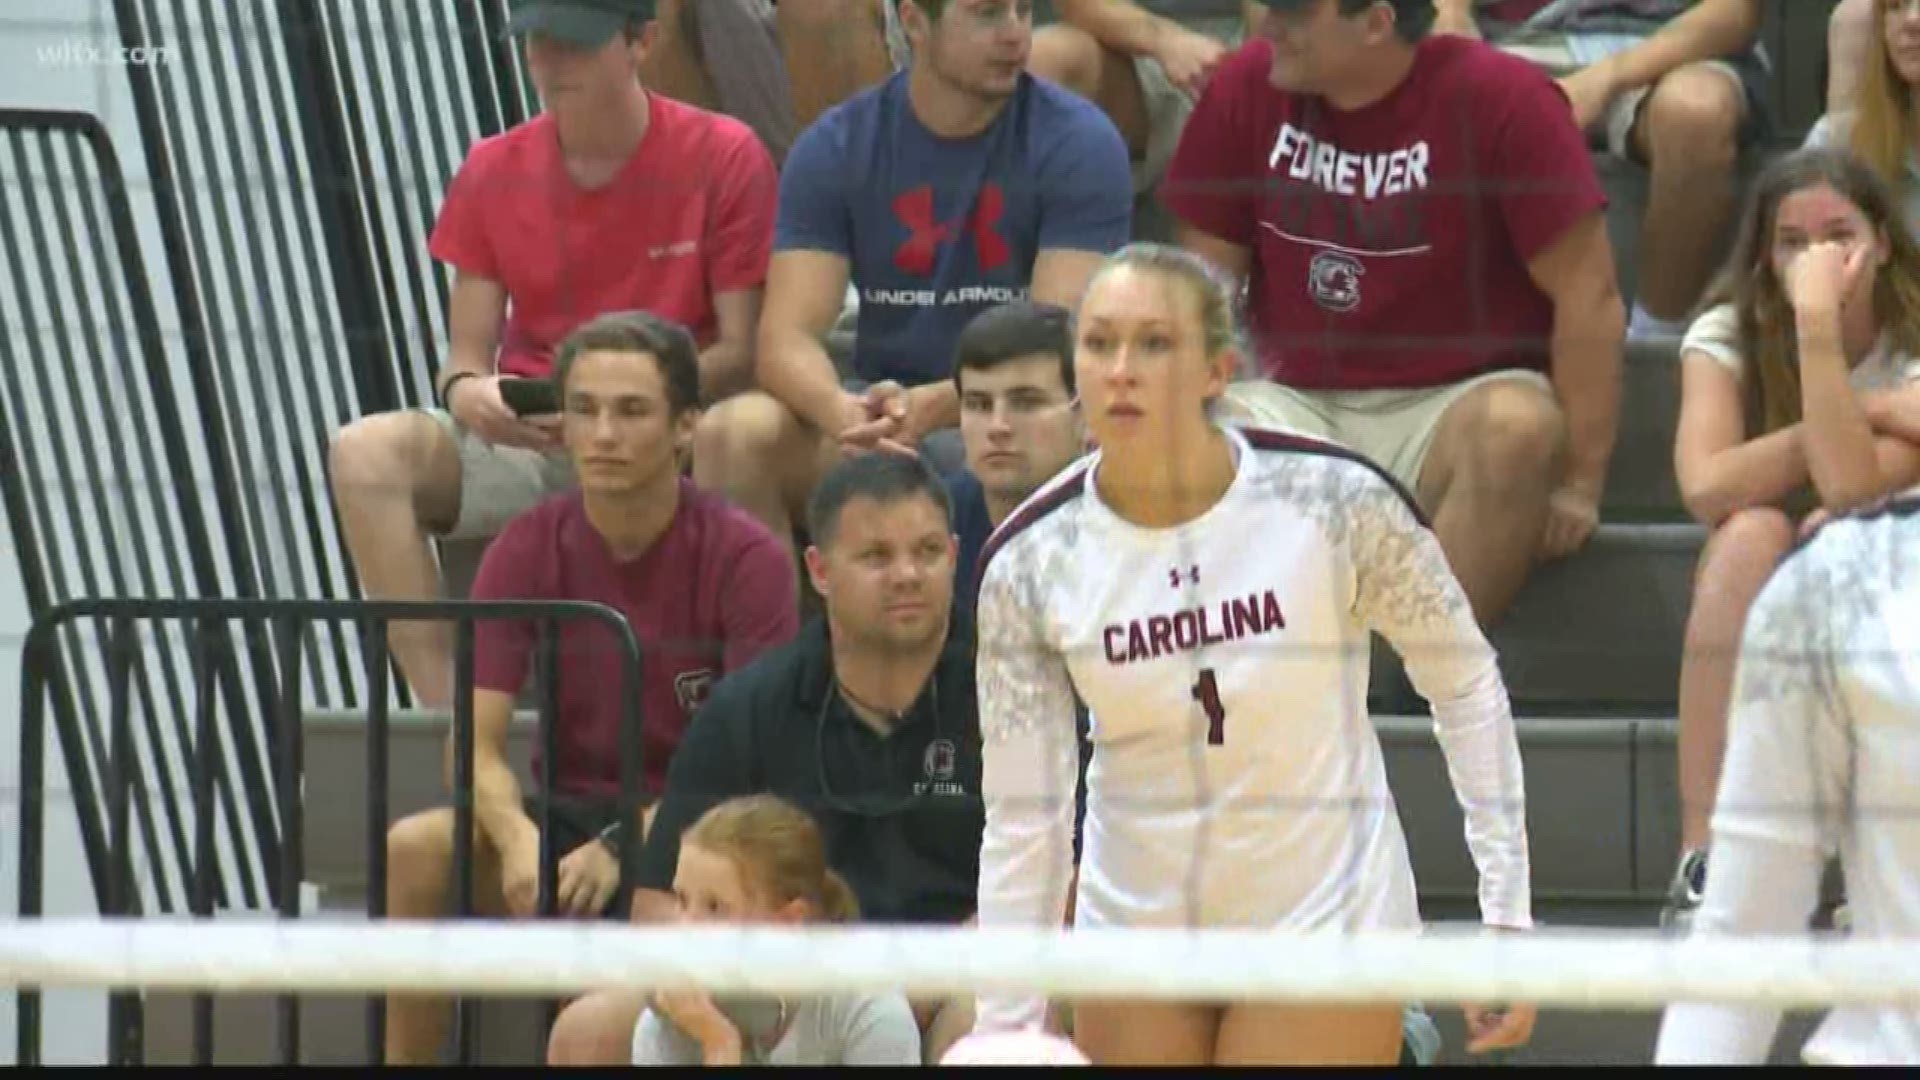 The USC volleyball team wins its home opener 3-0 over Charlotte.